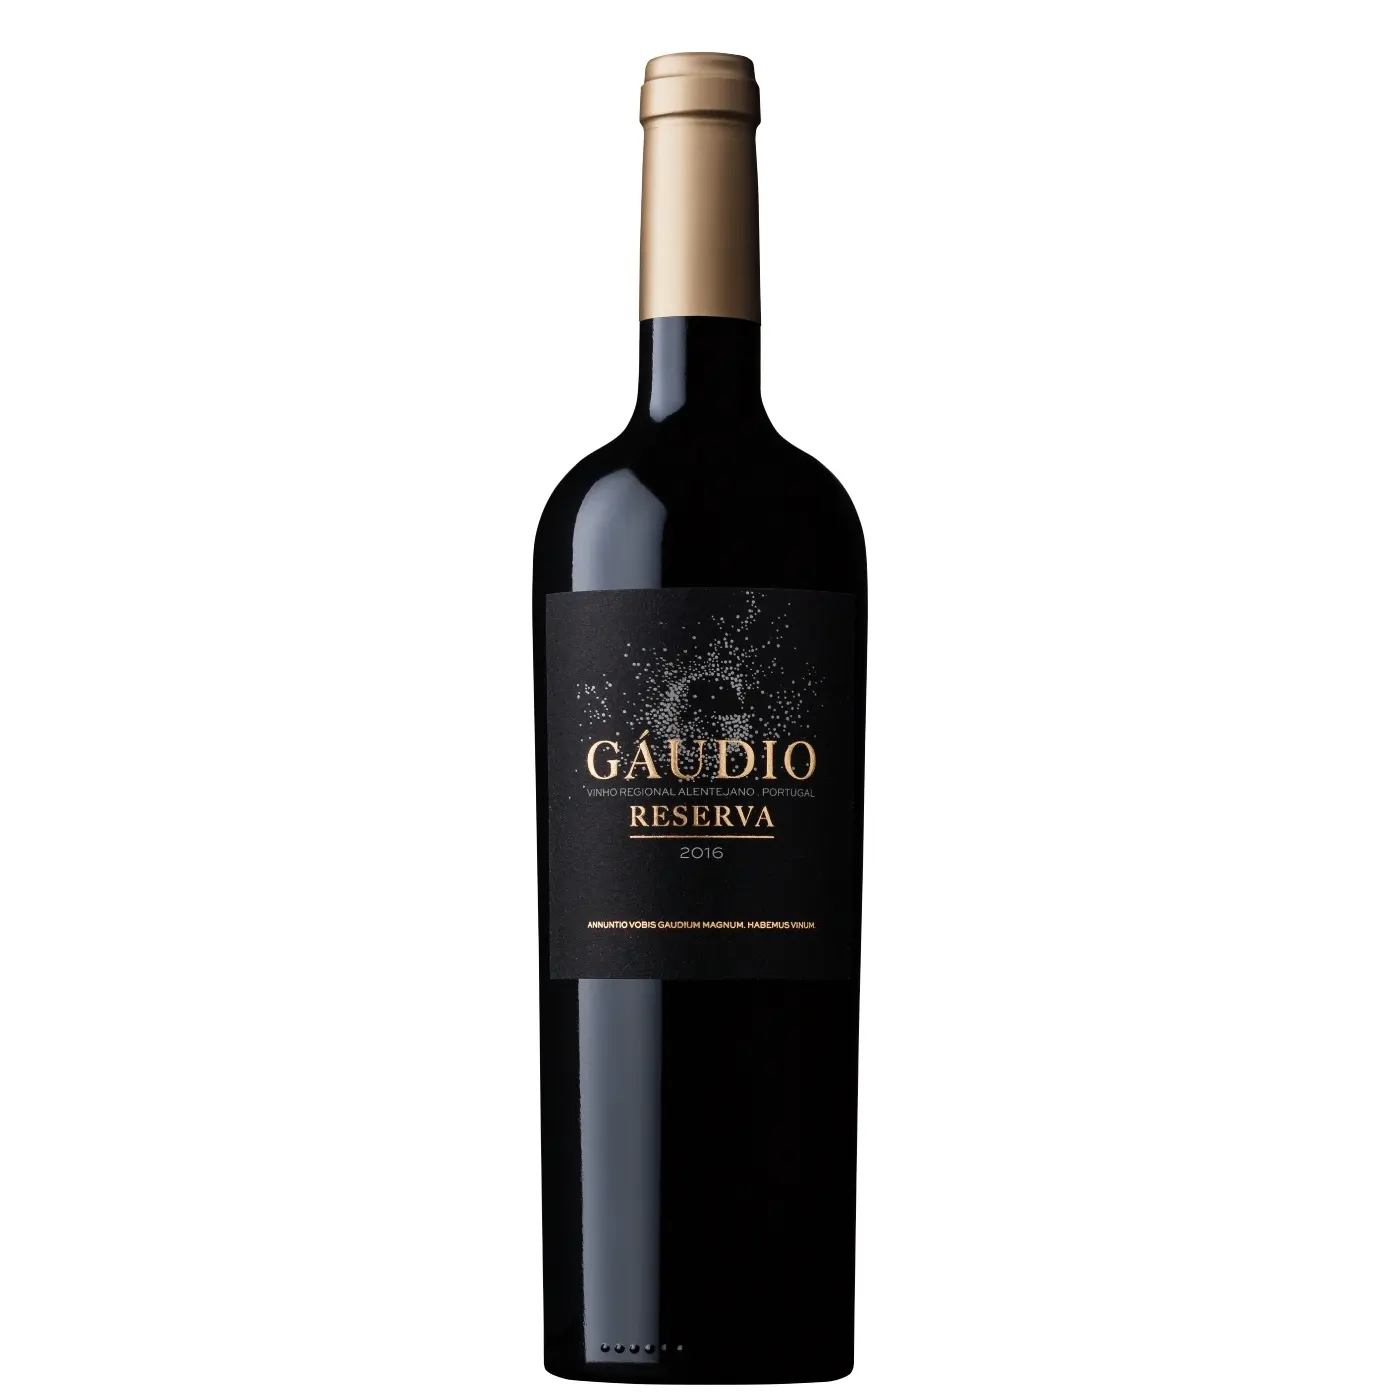 Gaudio Reserva, rich and full red wine from Portugal aged in new French oak barrels, Gold medal, 93-point WE, DOC Alentejo